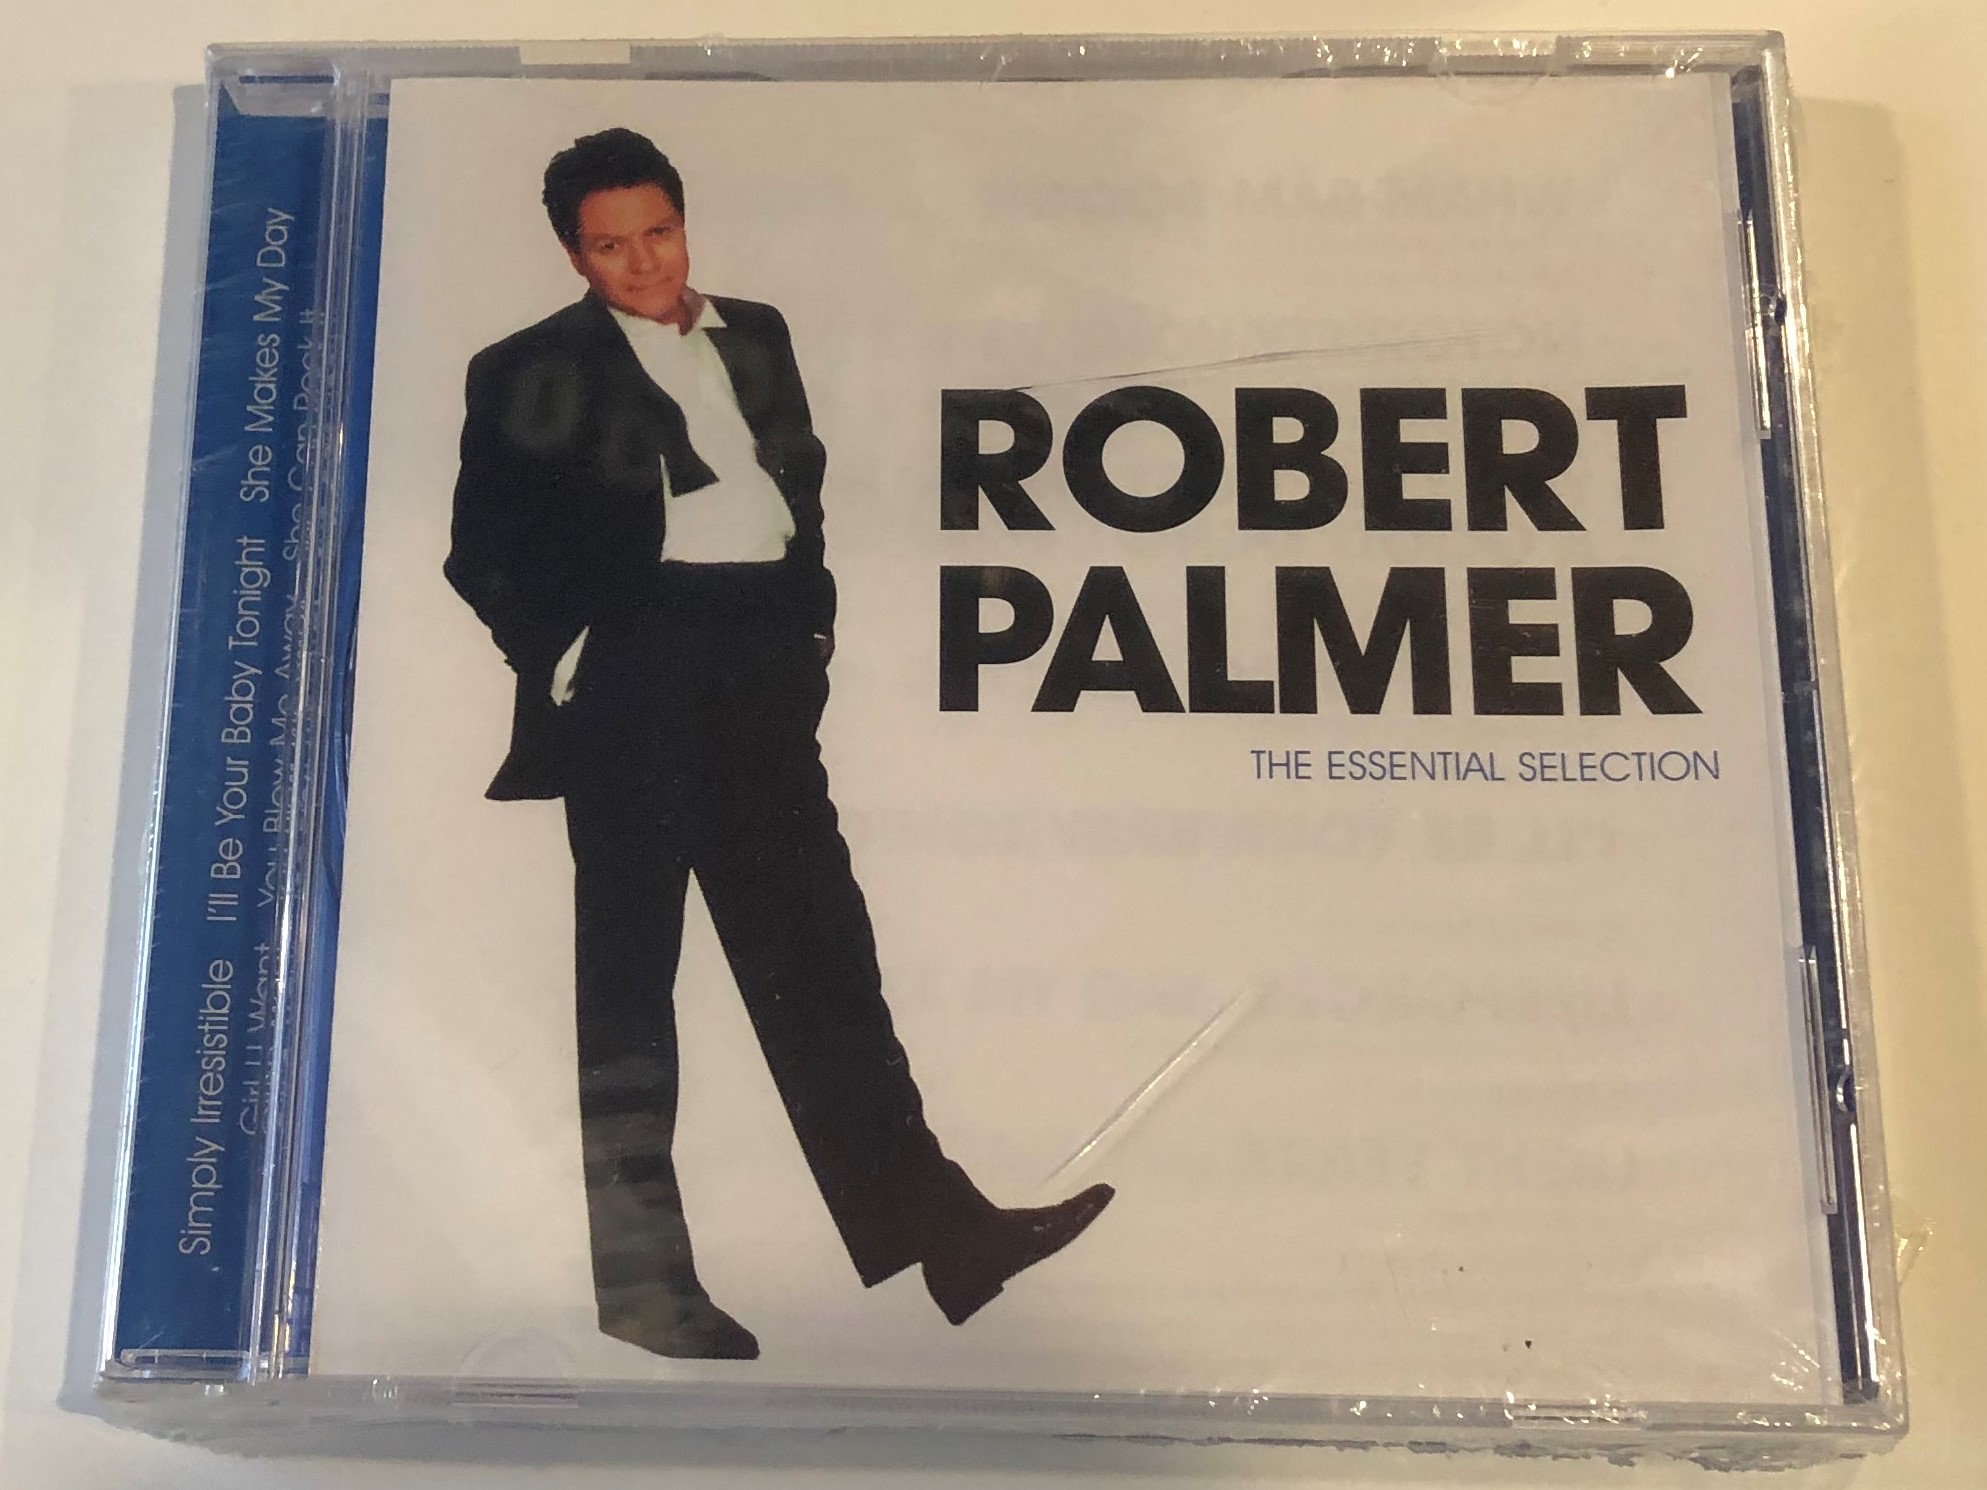 robert-palmer-the-essential-selection-simply-irresistible-i-ll-be-your-baby-tonight-she-makes-my-day-girl-u-want-you-blow-me-away-she-can-rock-it-disky-audio-cd-2000-si-997942-1-.jpg